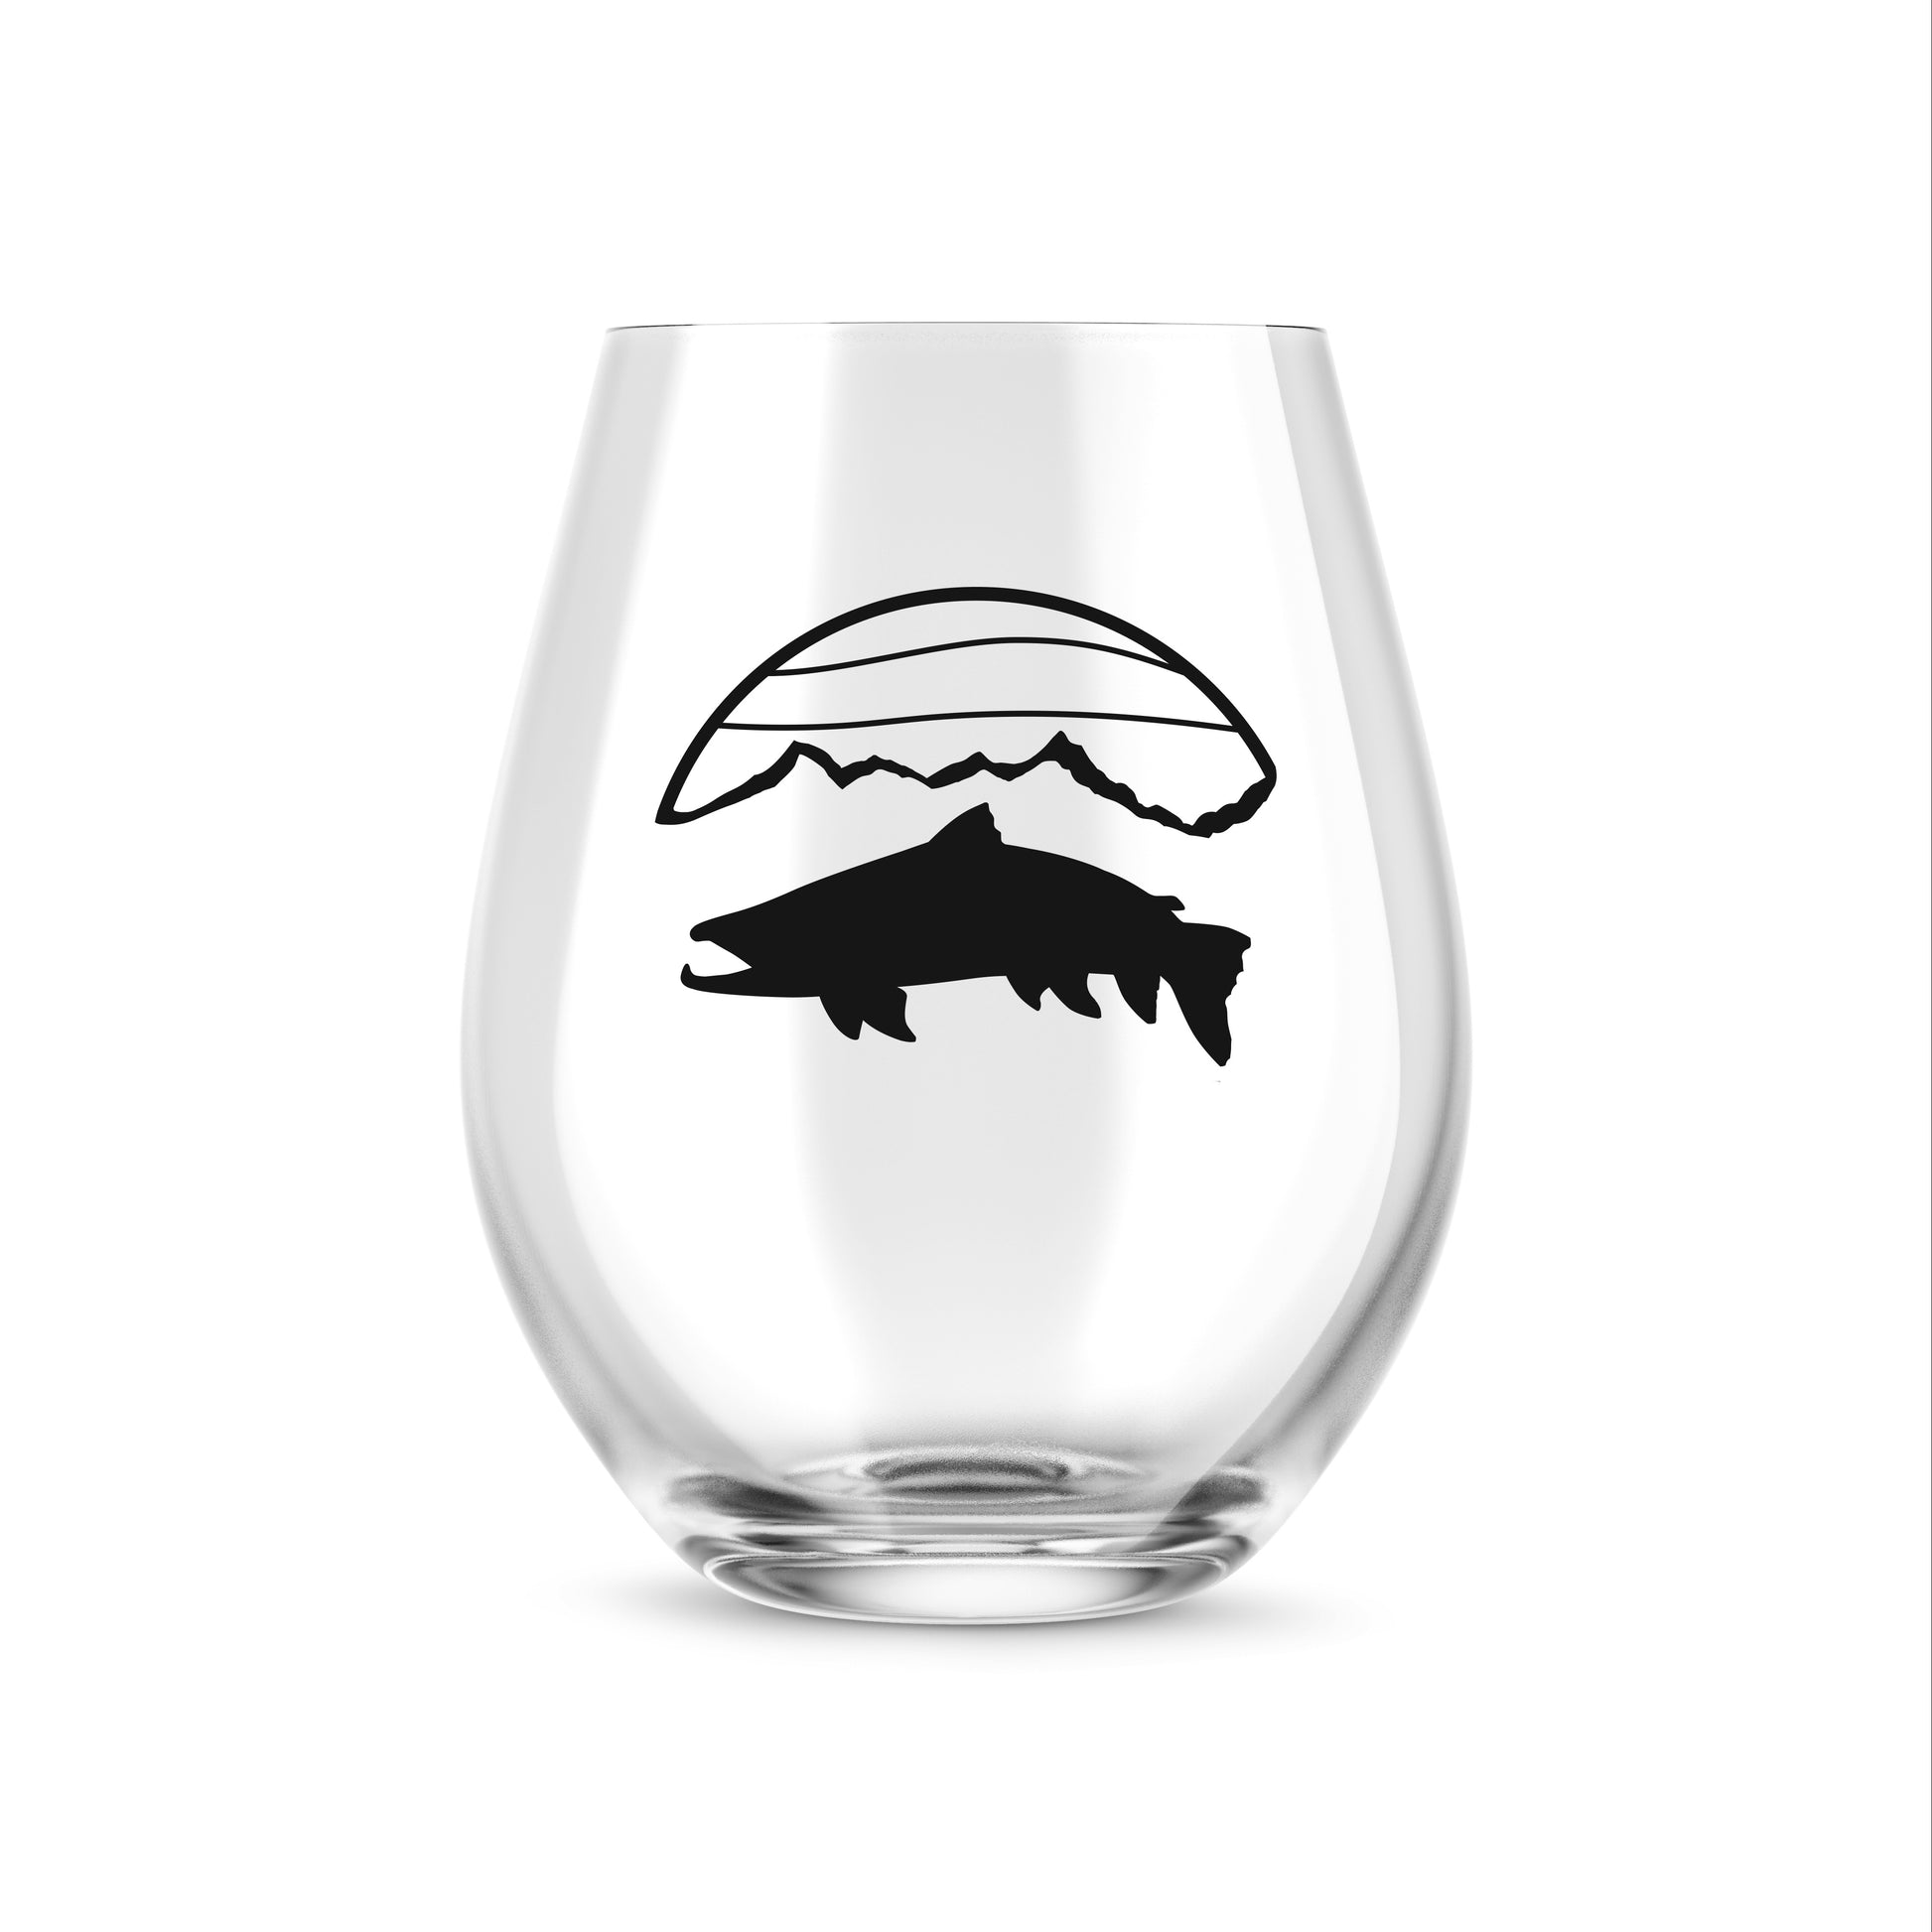 Whine glass with trout silhouette and mountains